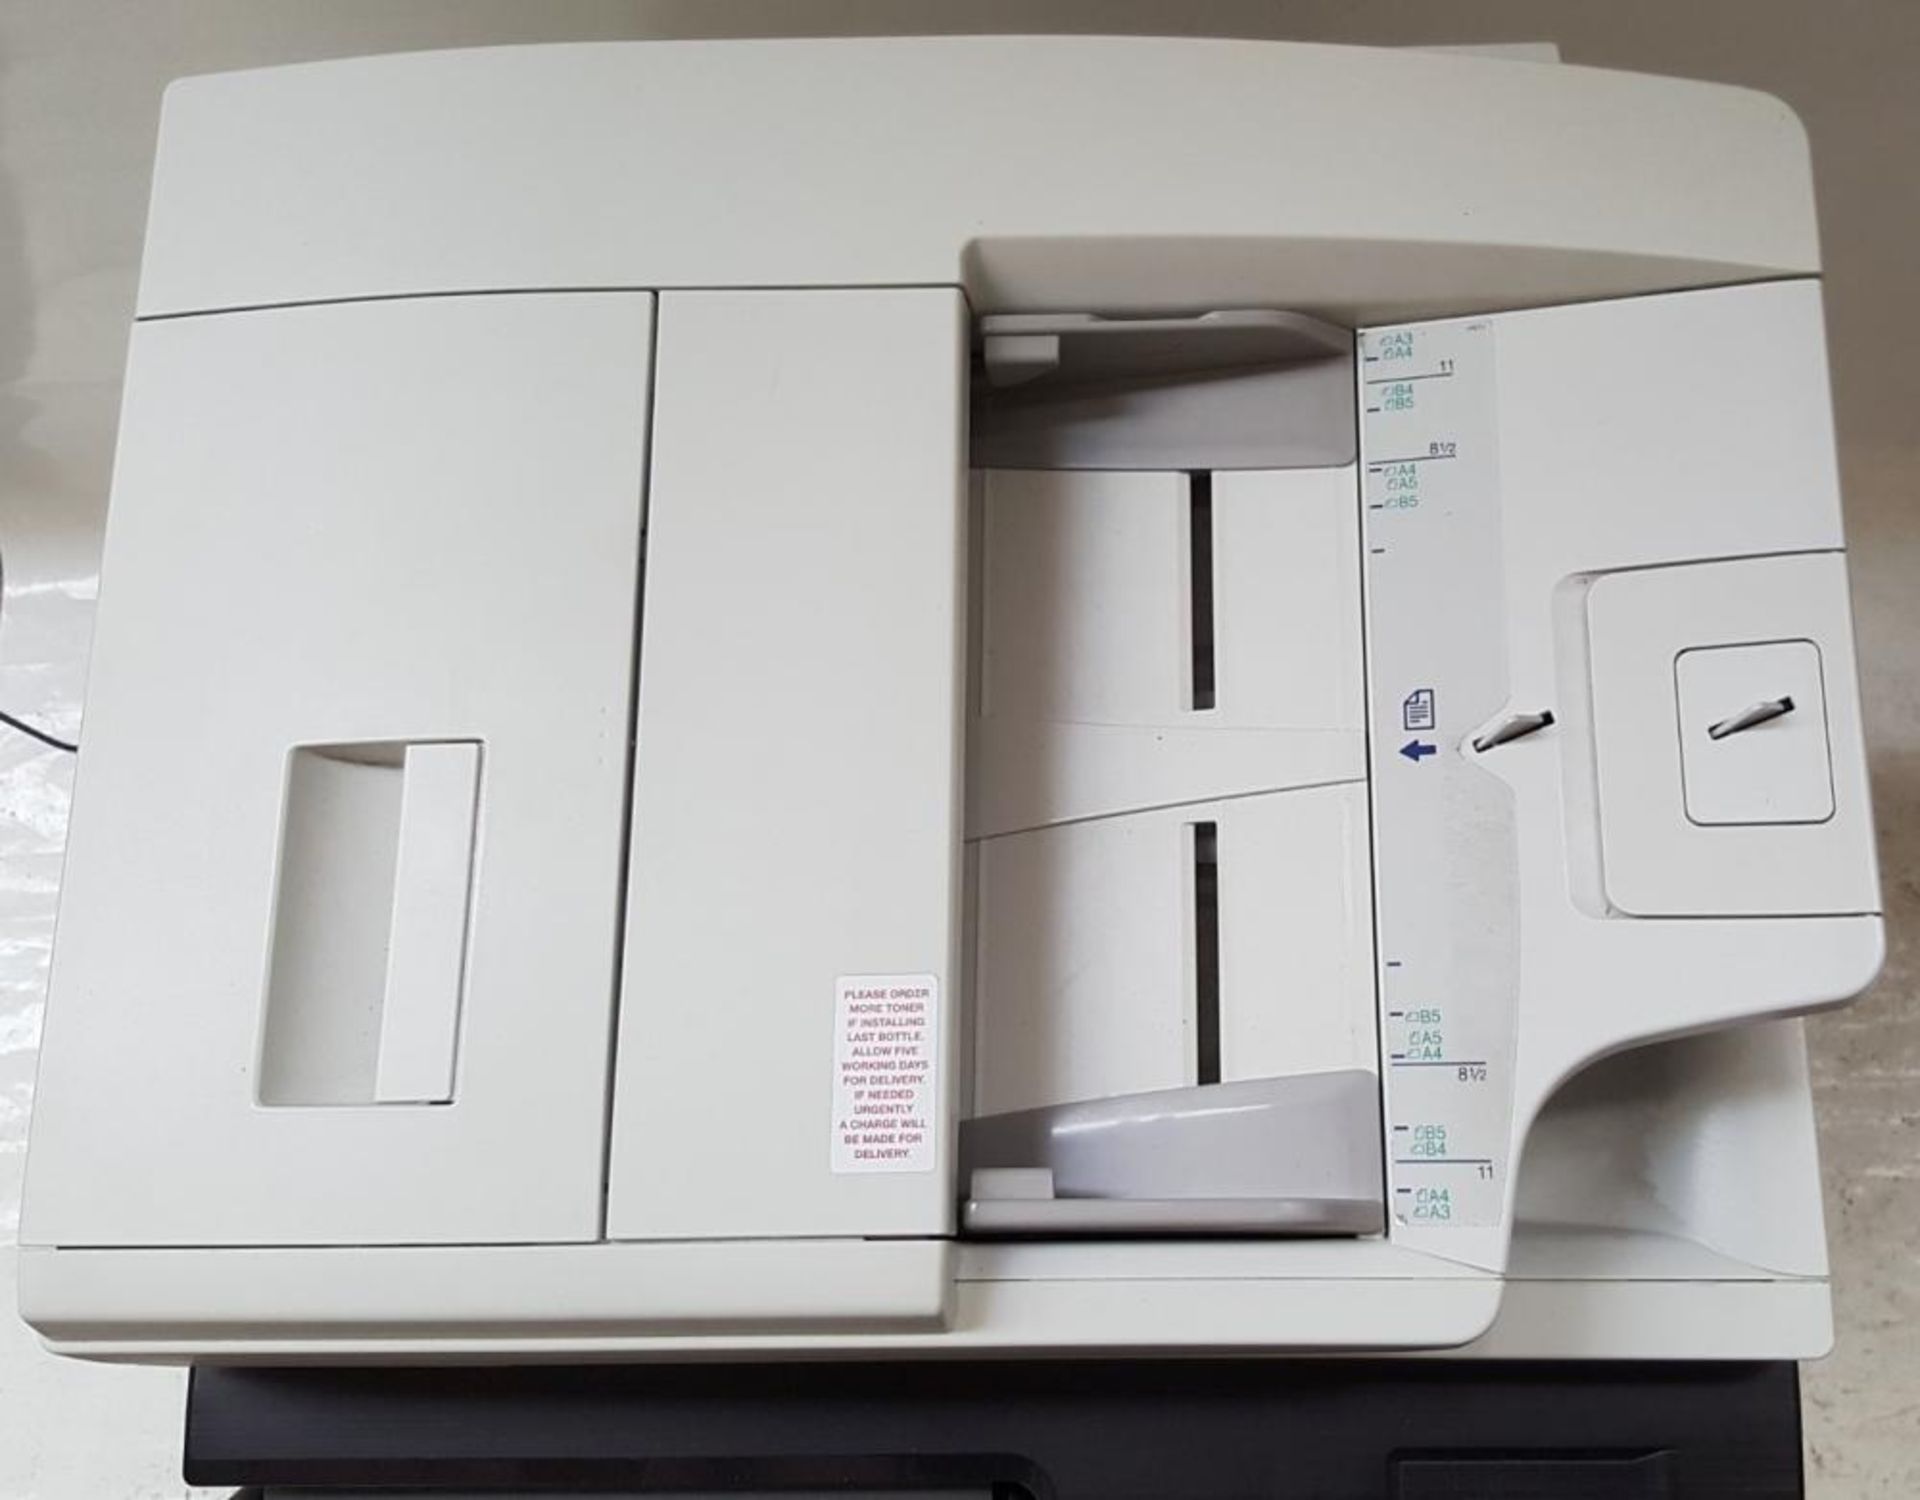 1 x Sharp MX-4112N Laser Office Printer Multifunction Device Copier Scanner (Has Come Out Of A Wor - Image 5 of 7